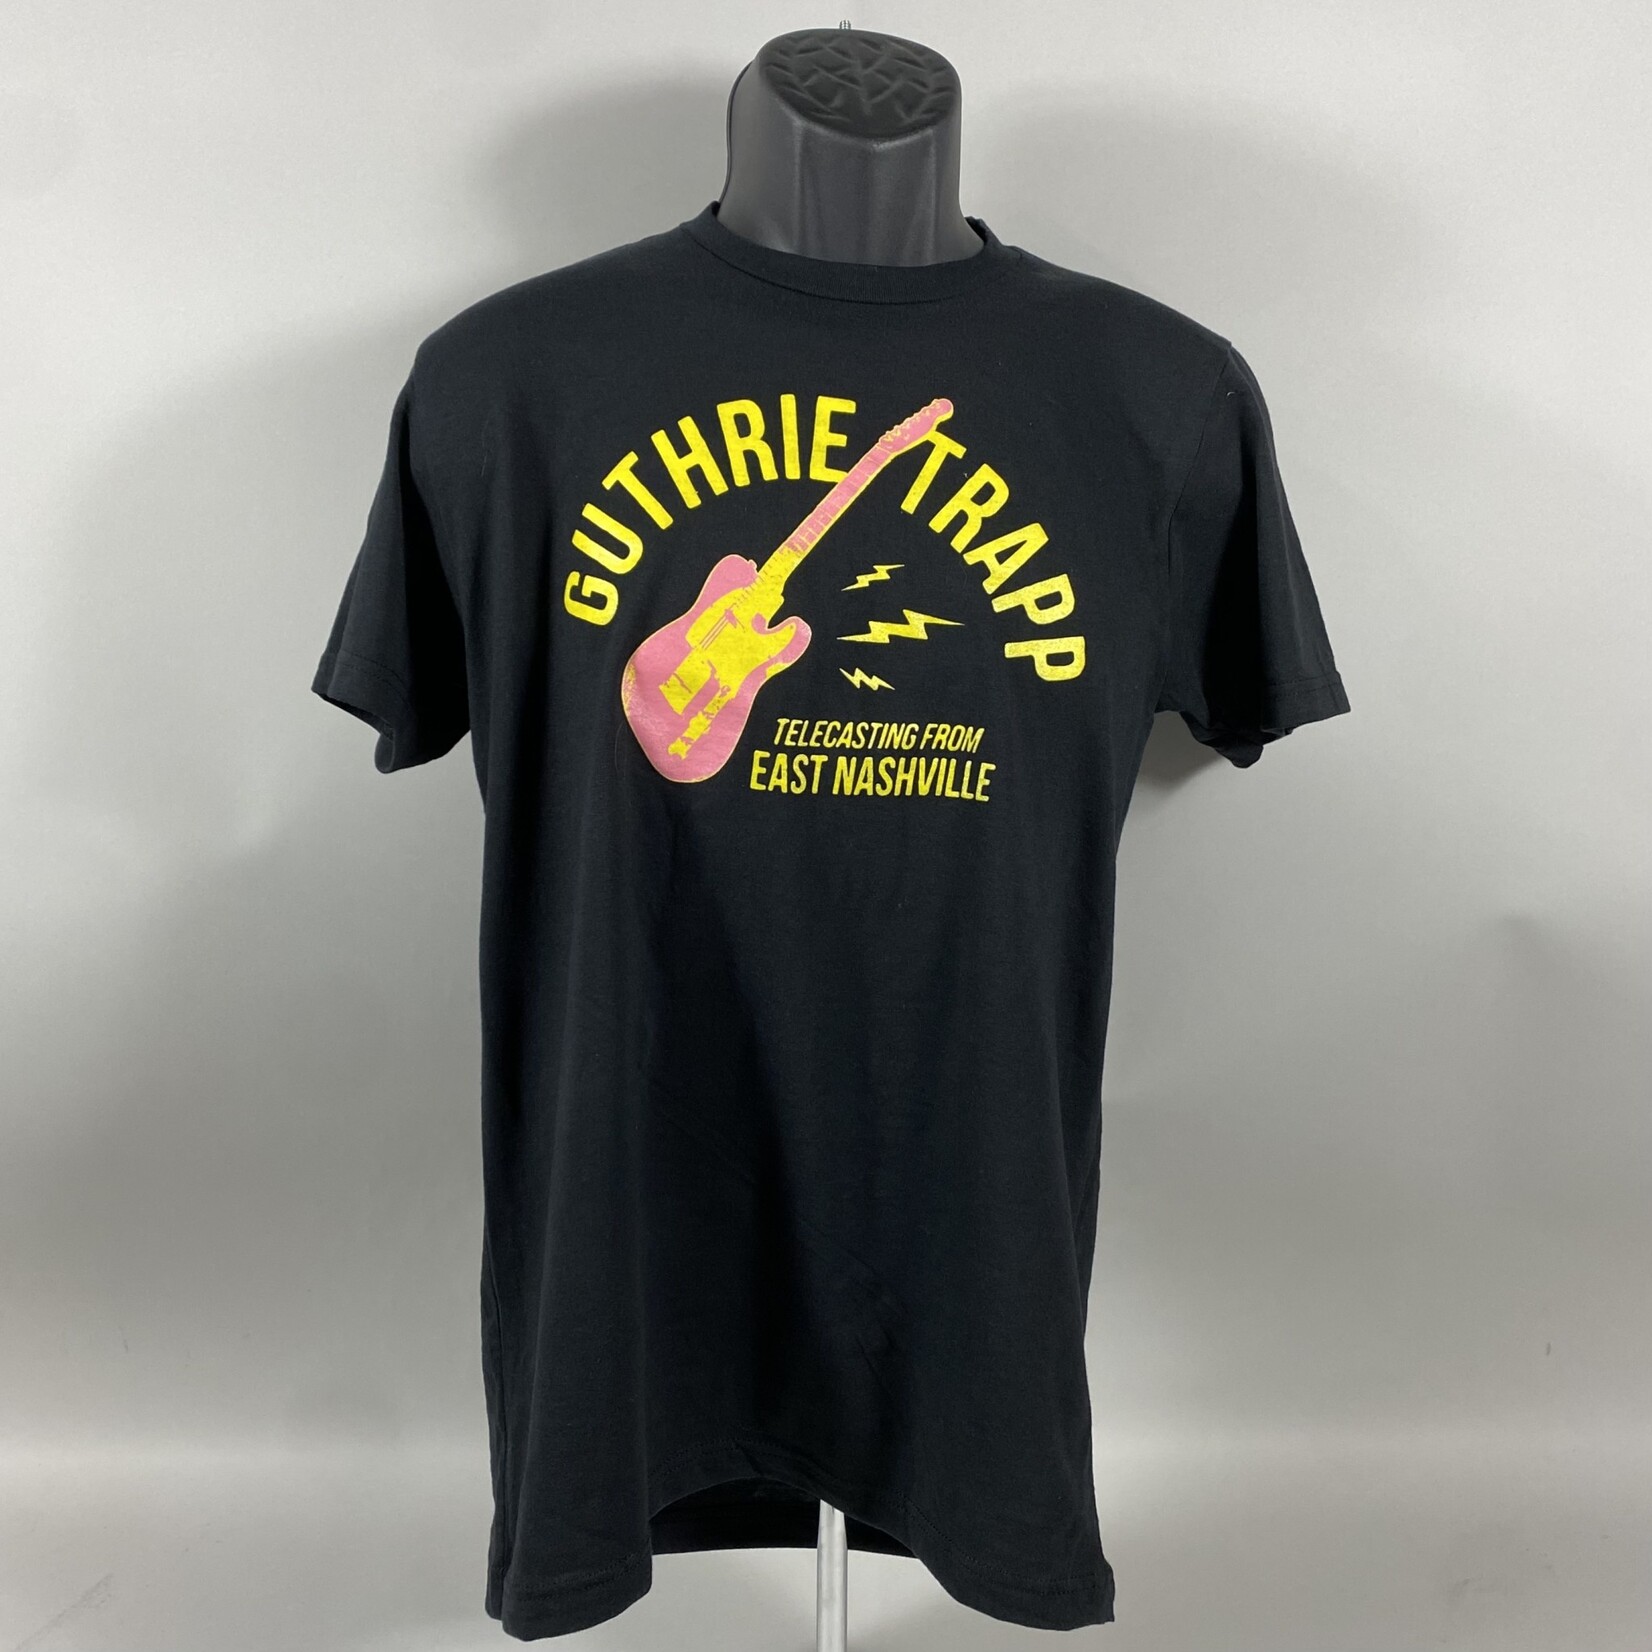 Guthrie Trapp Trio Guthrie Trapp "Telecasting" Shirt Yellow/Pink